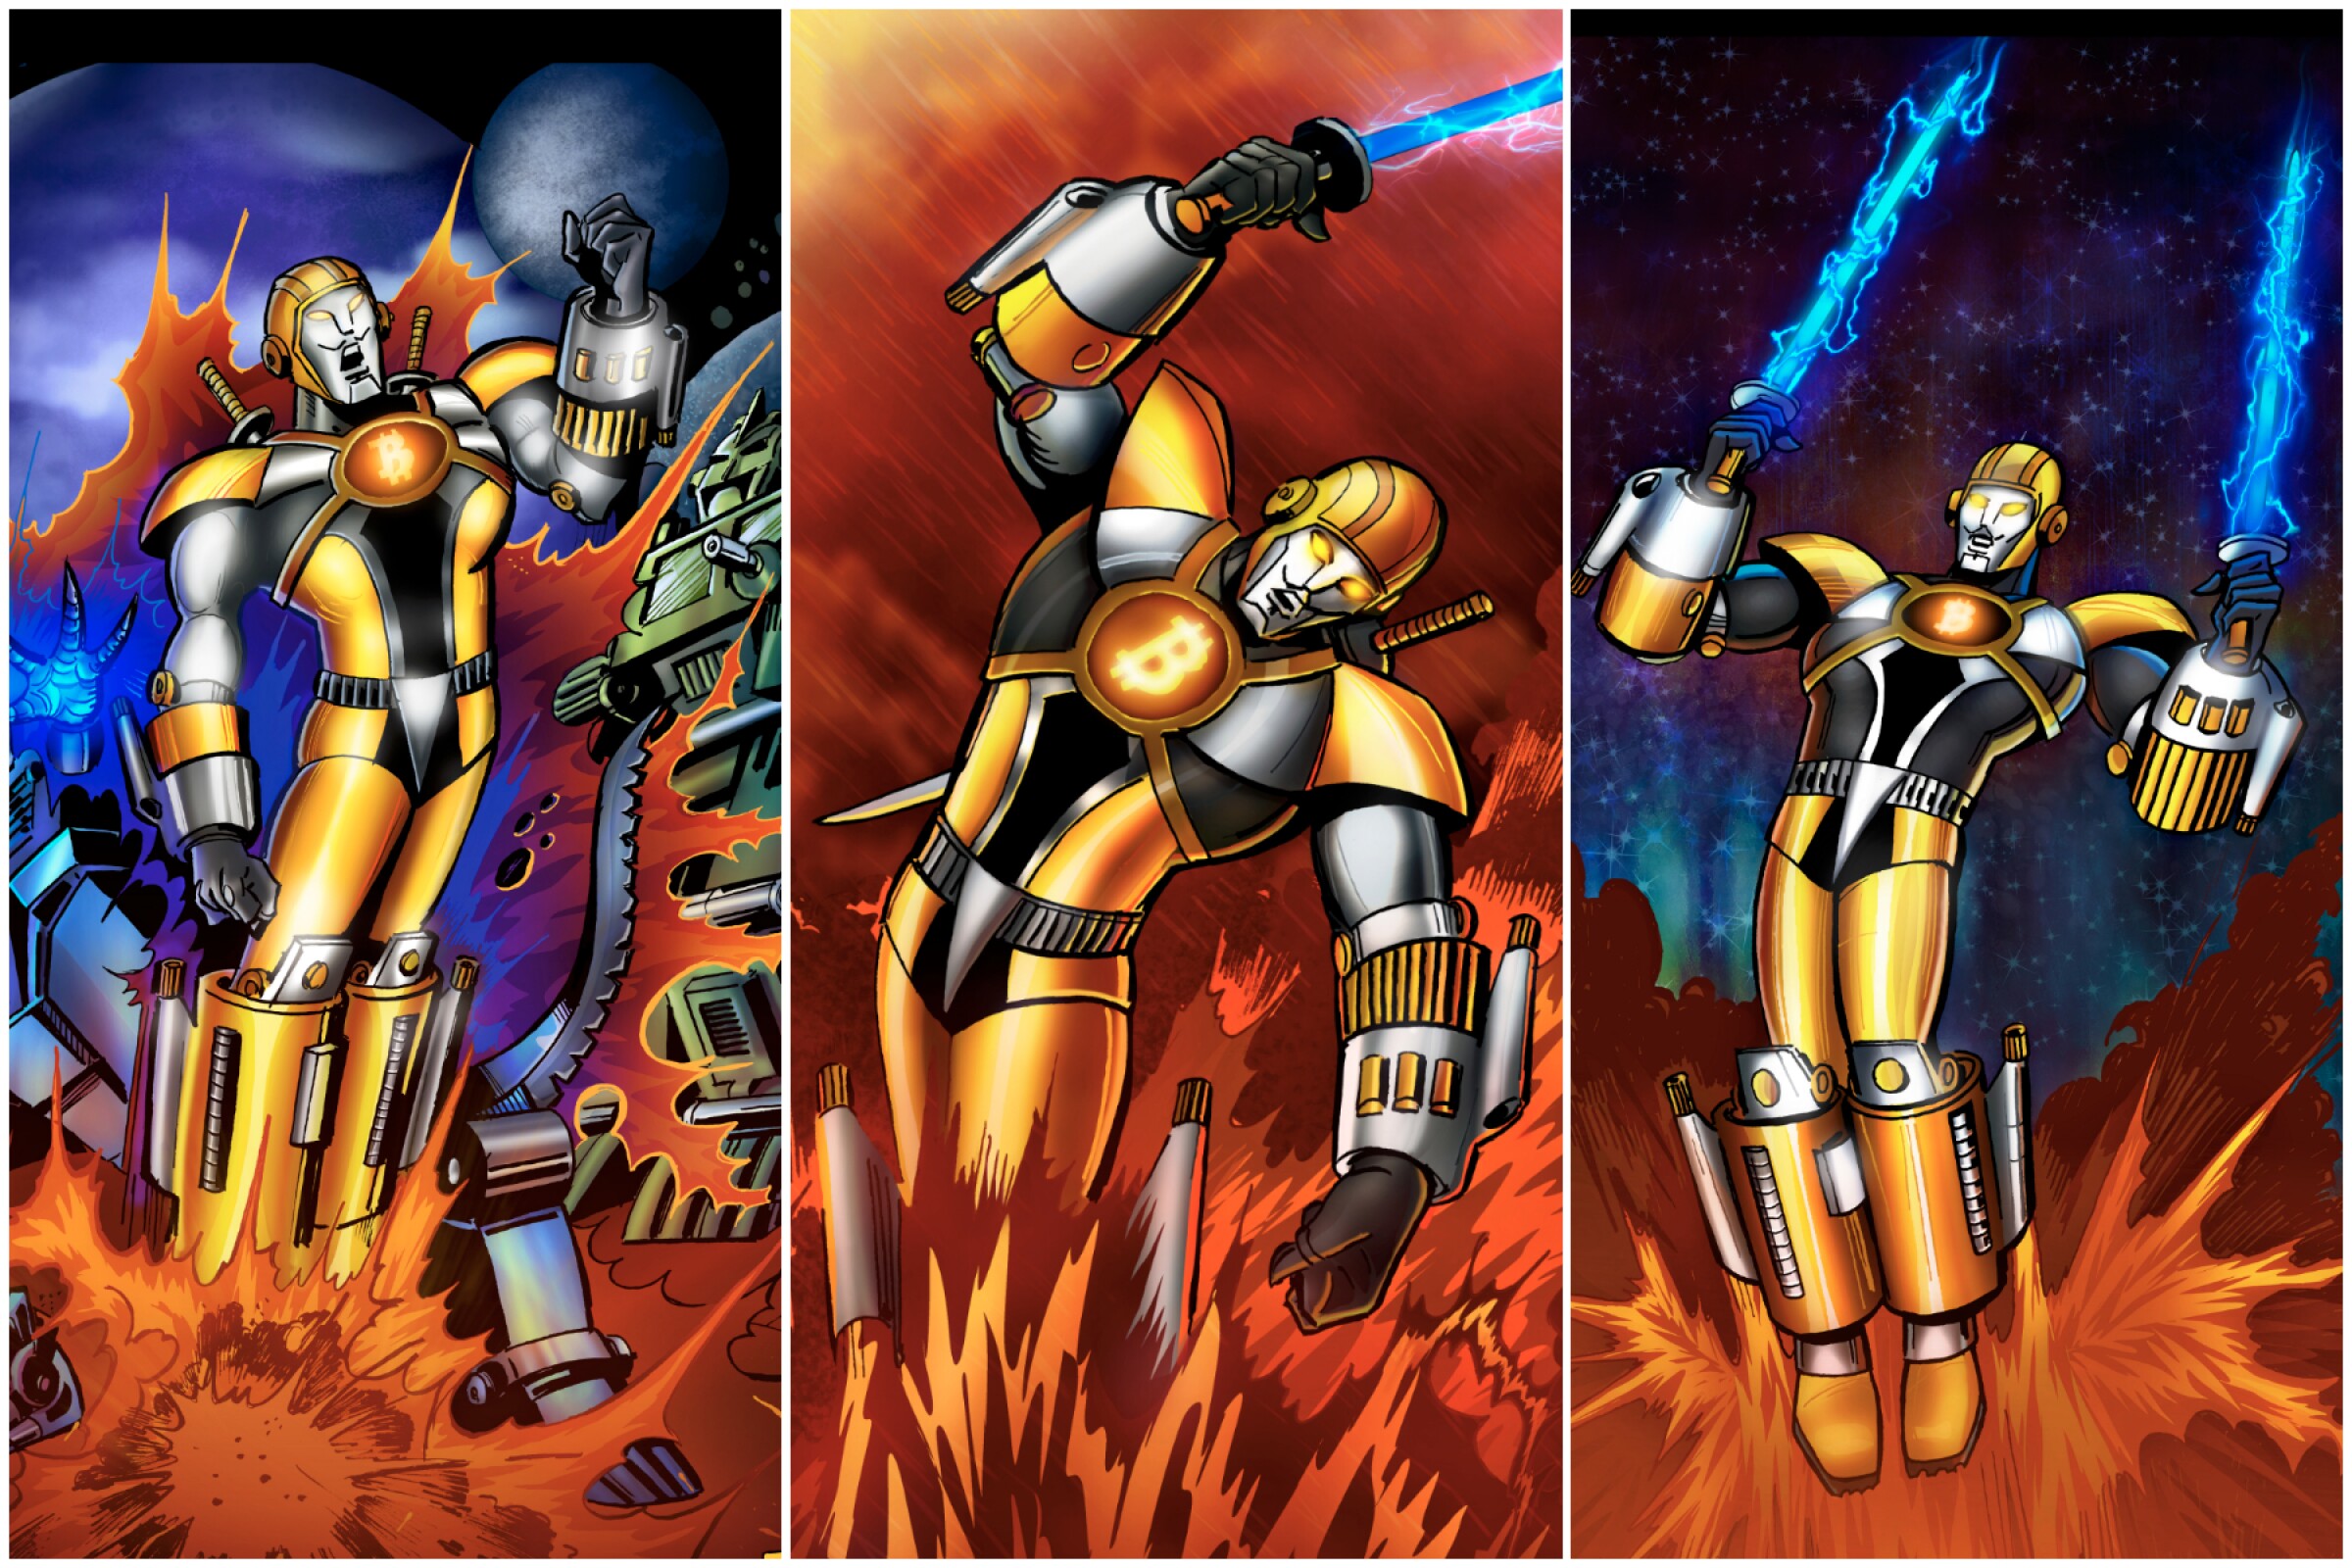 A sample of three images from the NFT pack collection titled “Satoshi The Creator – Genesis” by comic book artist José Delbo